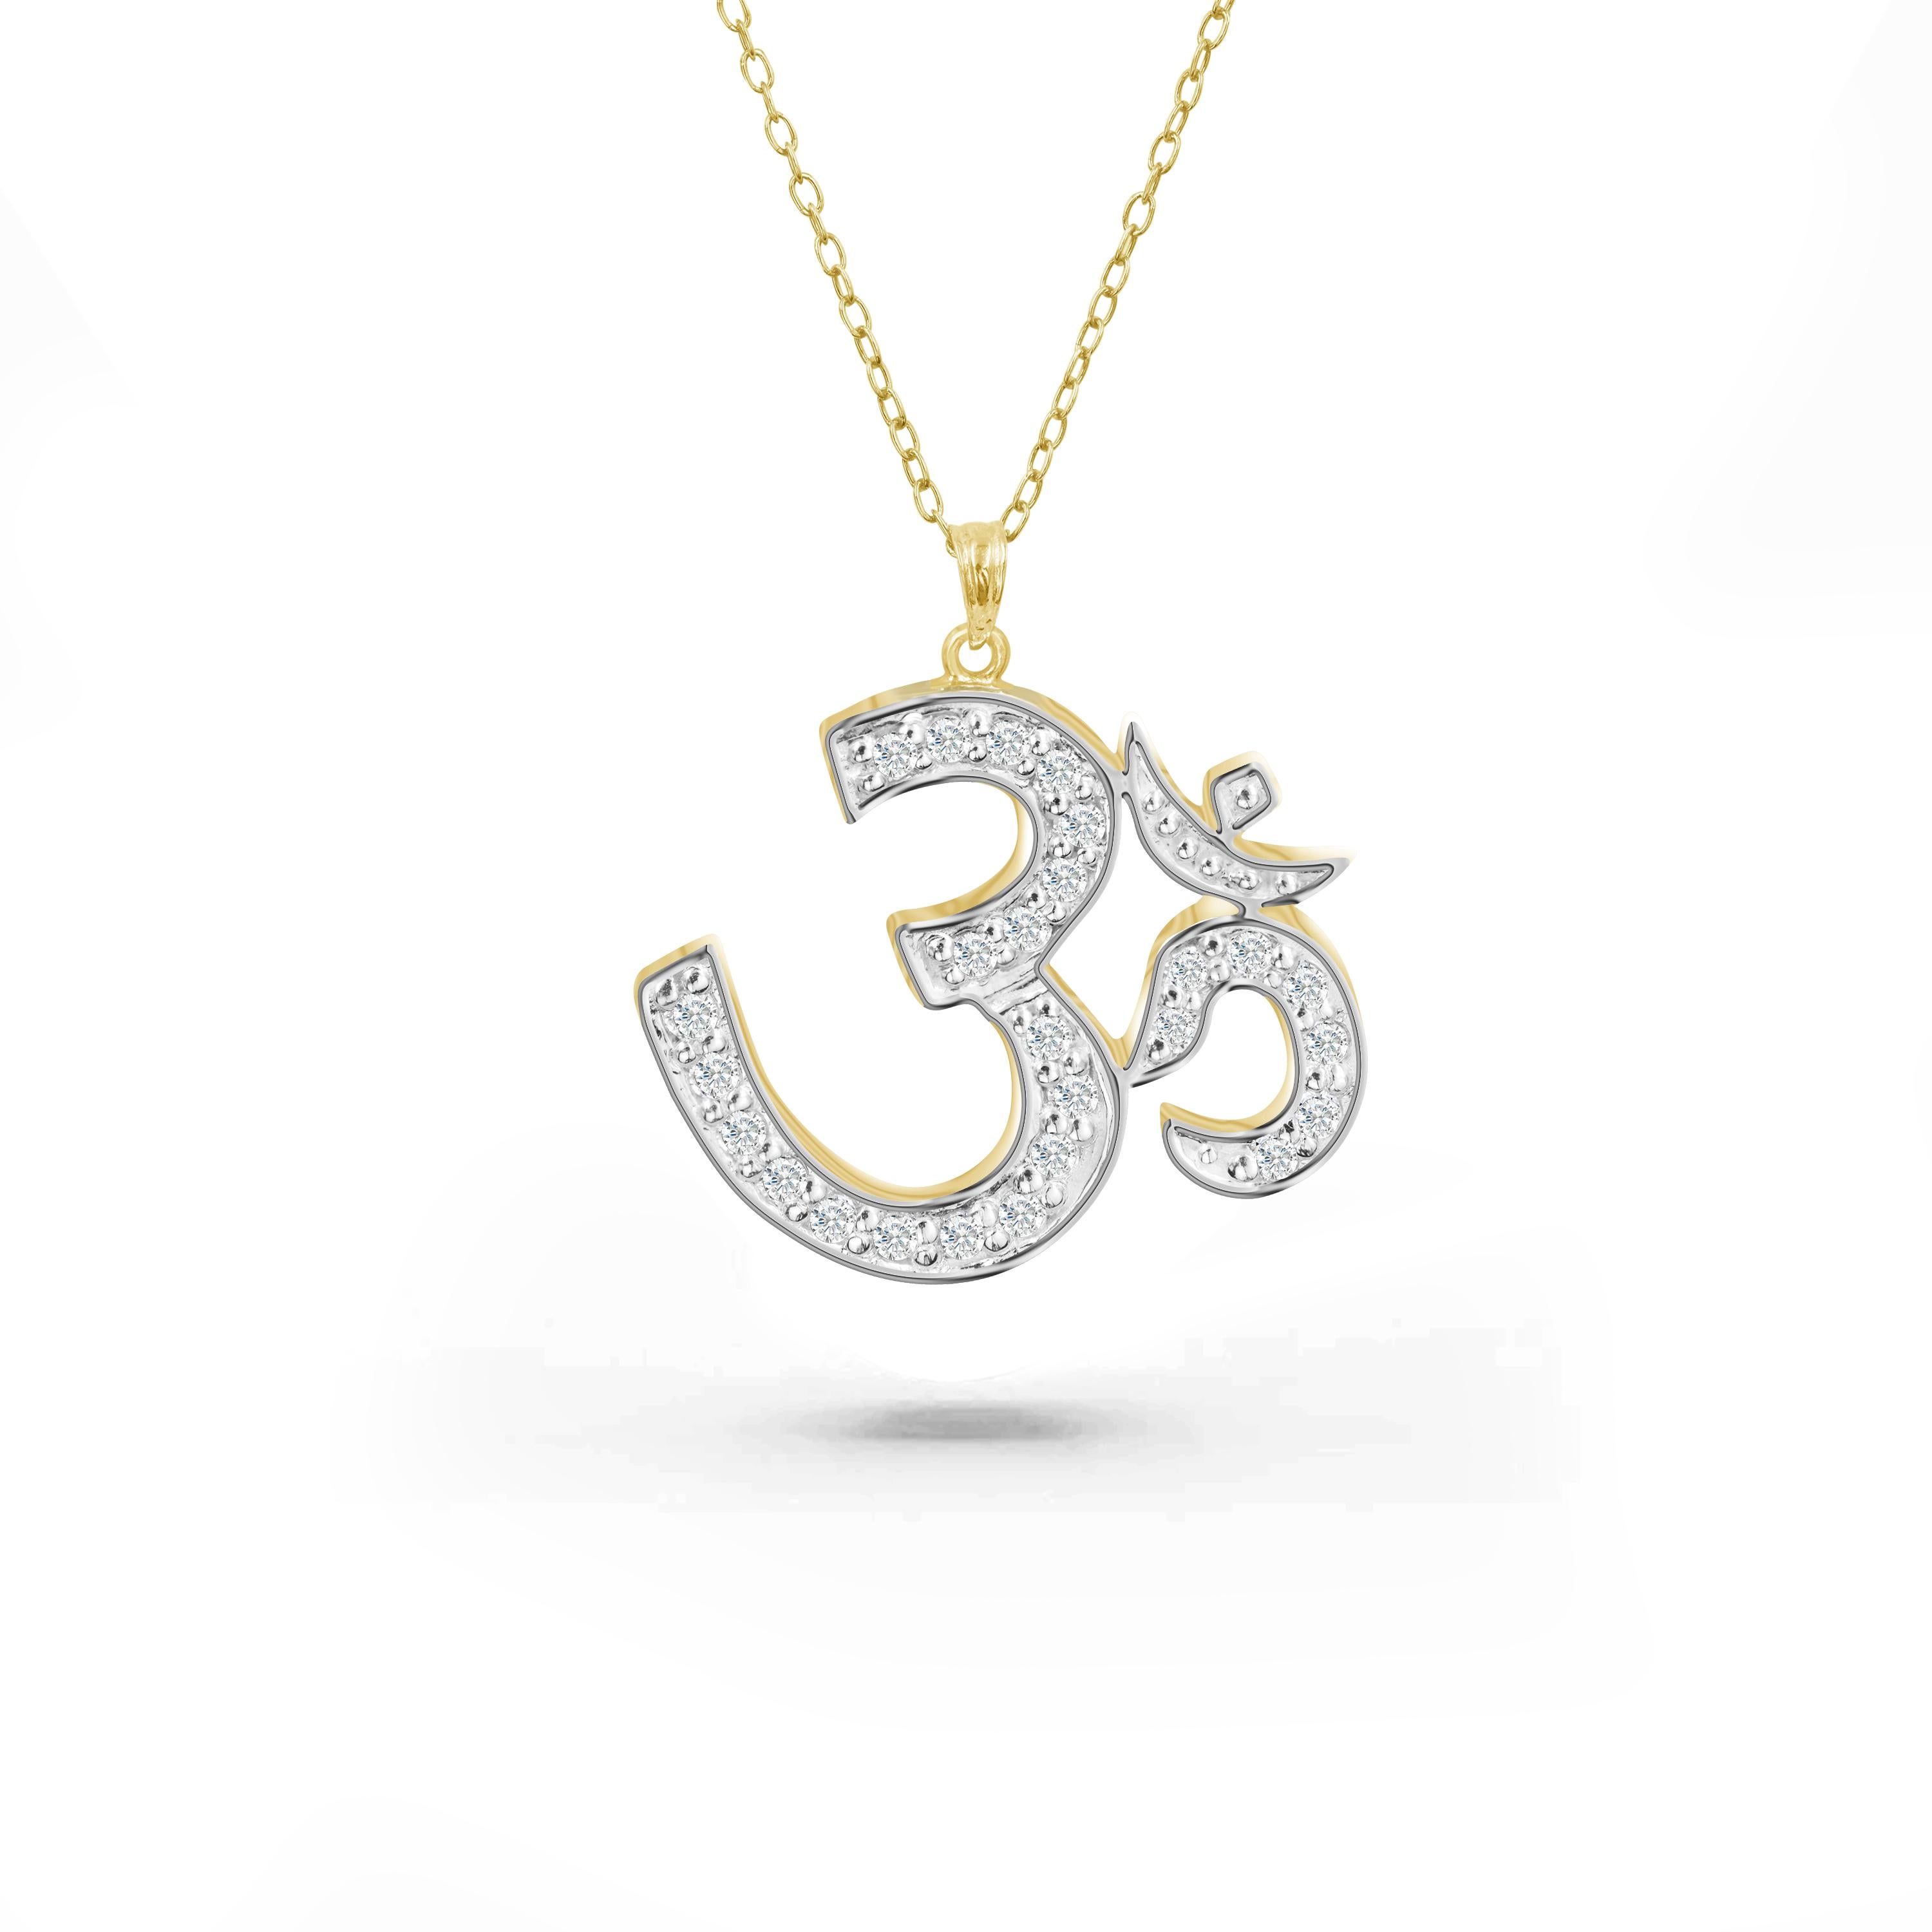 The handcrafted OM diamond necklace is perfect everyday wear to bring inner peace and spirituality. This beautiful Hindu religious OM necklace is one of a kind necklace made in Thailand. This Hindu necklace can be customized to your choice of gold